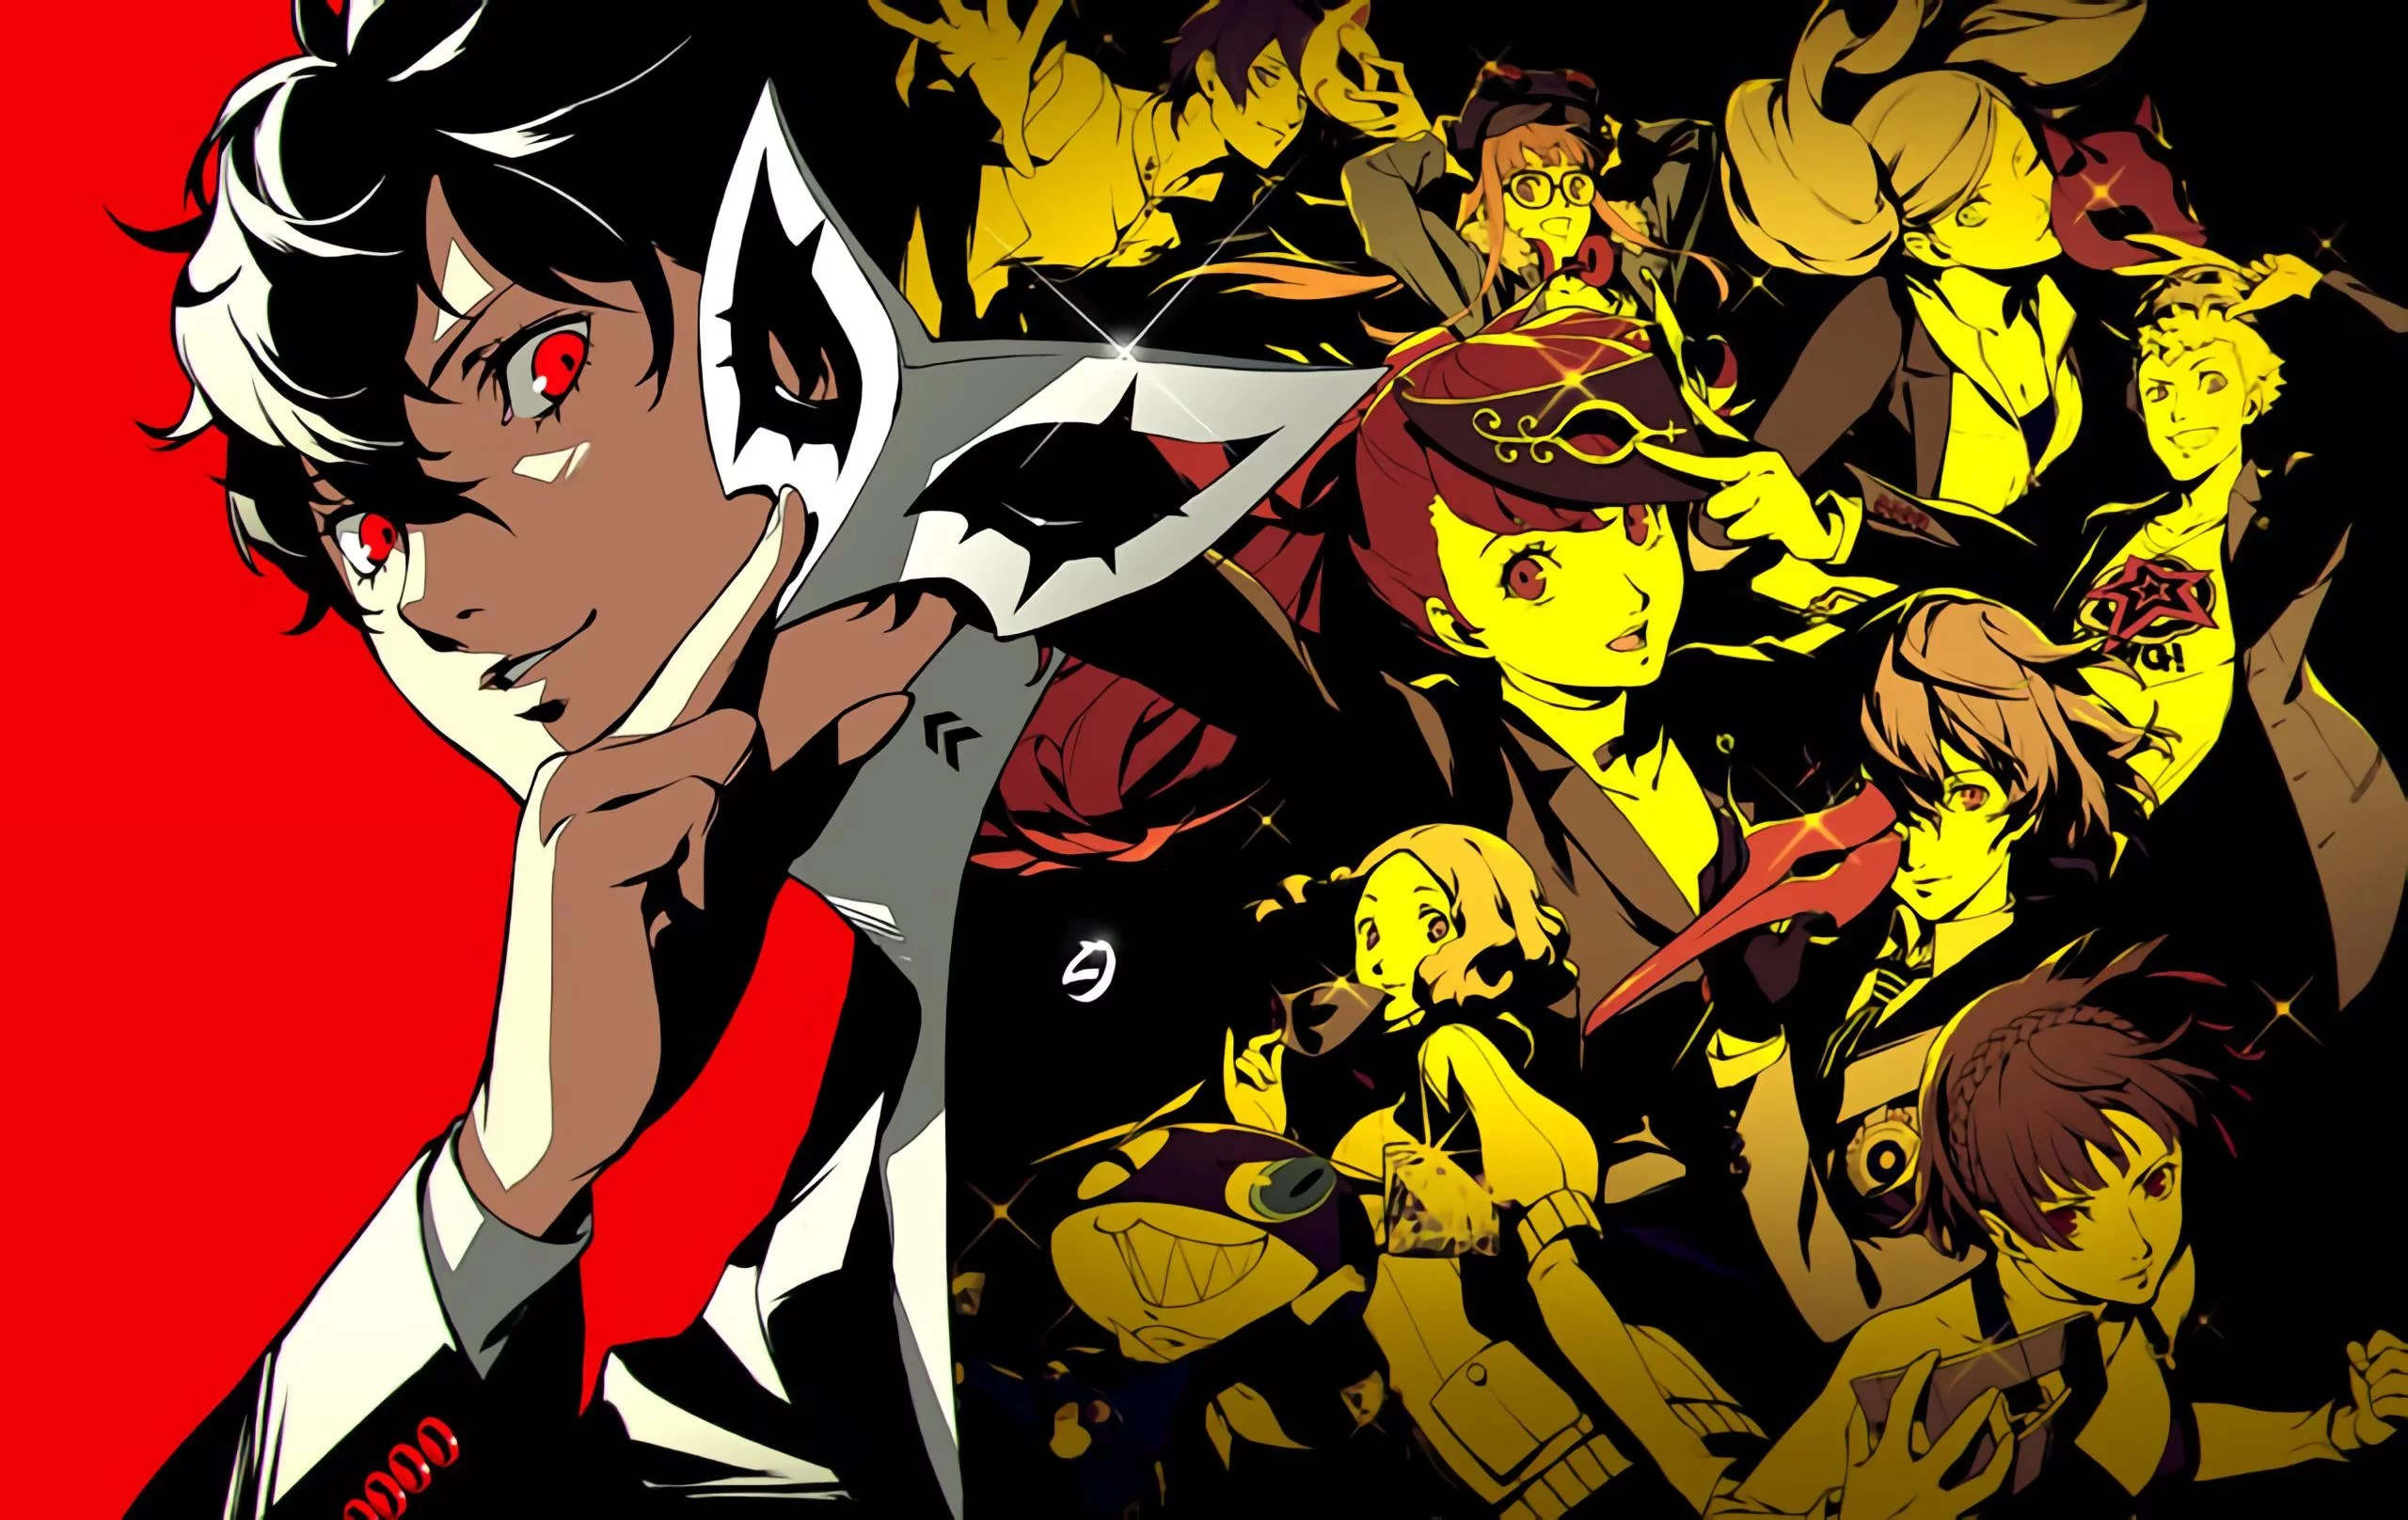 Persona 5 Royal DLC marks the return of Persona 3 and 4 protagonists